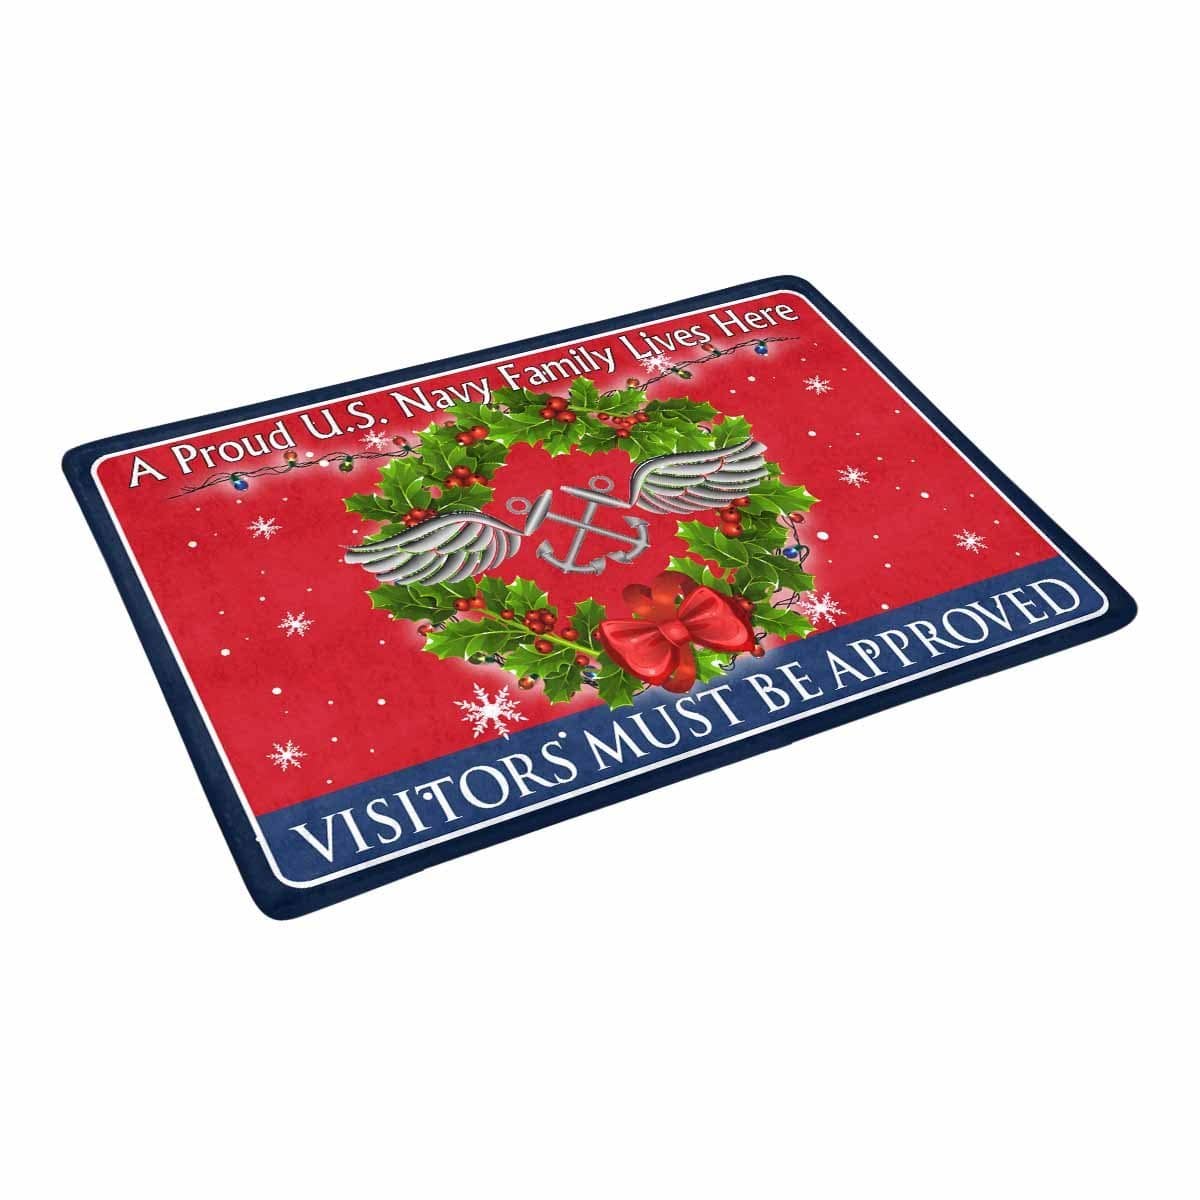 U.S Navy Aviation Boatswain's Mate Navy AB - Visitors must be approved - Christmas Doormat-Doormat-Navy-Rate-Veterans Nation